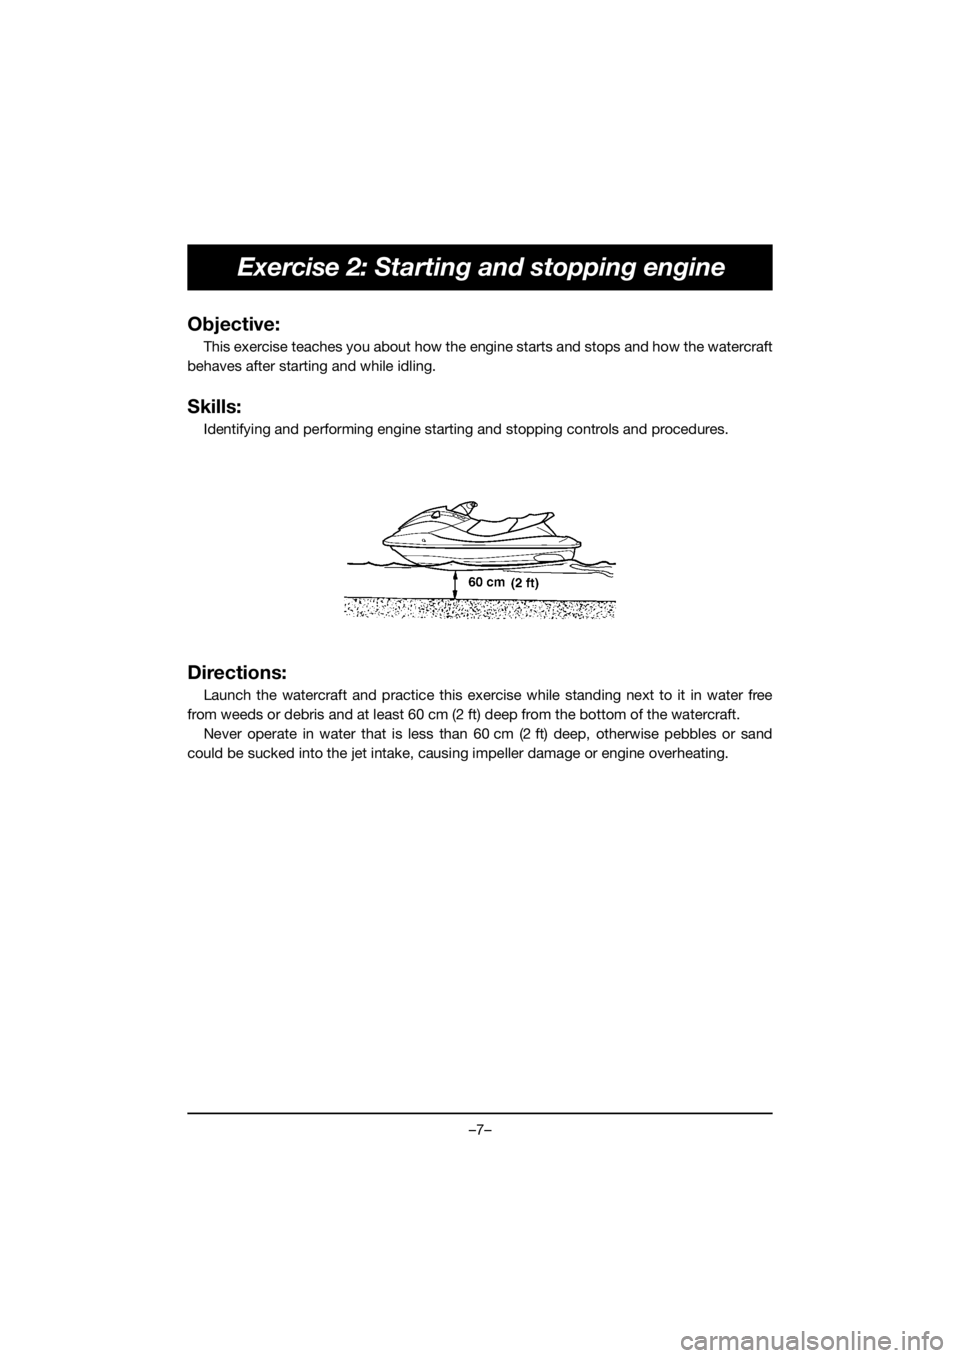 YAMAHA VX DELUXE 2019  Manuale de Empleo (in Spanish) –7–
Exercise 2: Starting and stopping engine
Objective:
This exercise teaches you about how the engine starts and stops and how the watercraft
behaves after starting and while idling.
Skills:
Iden